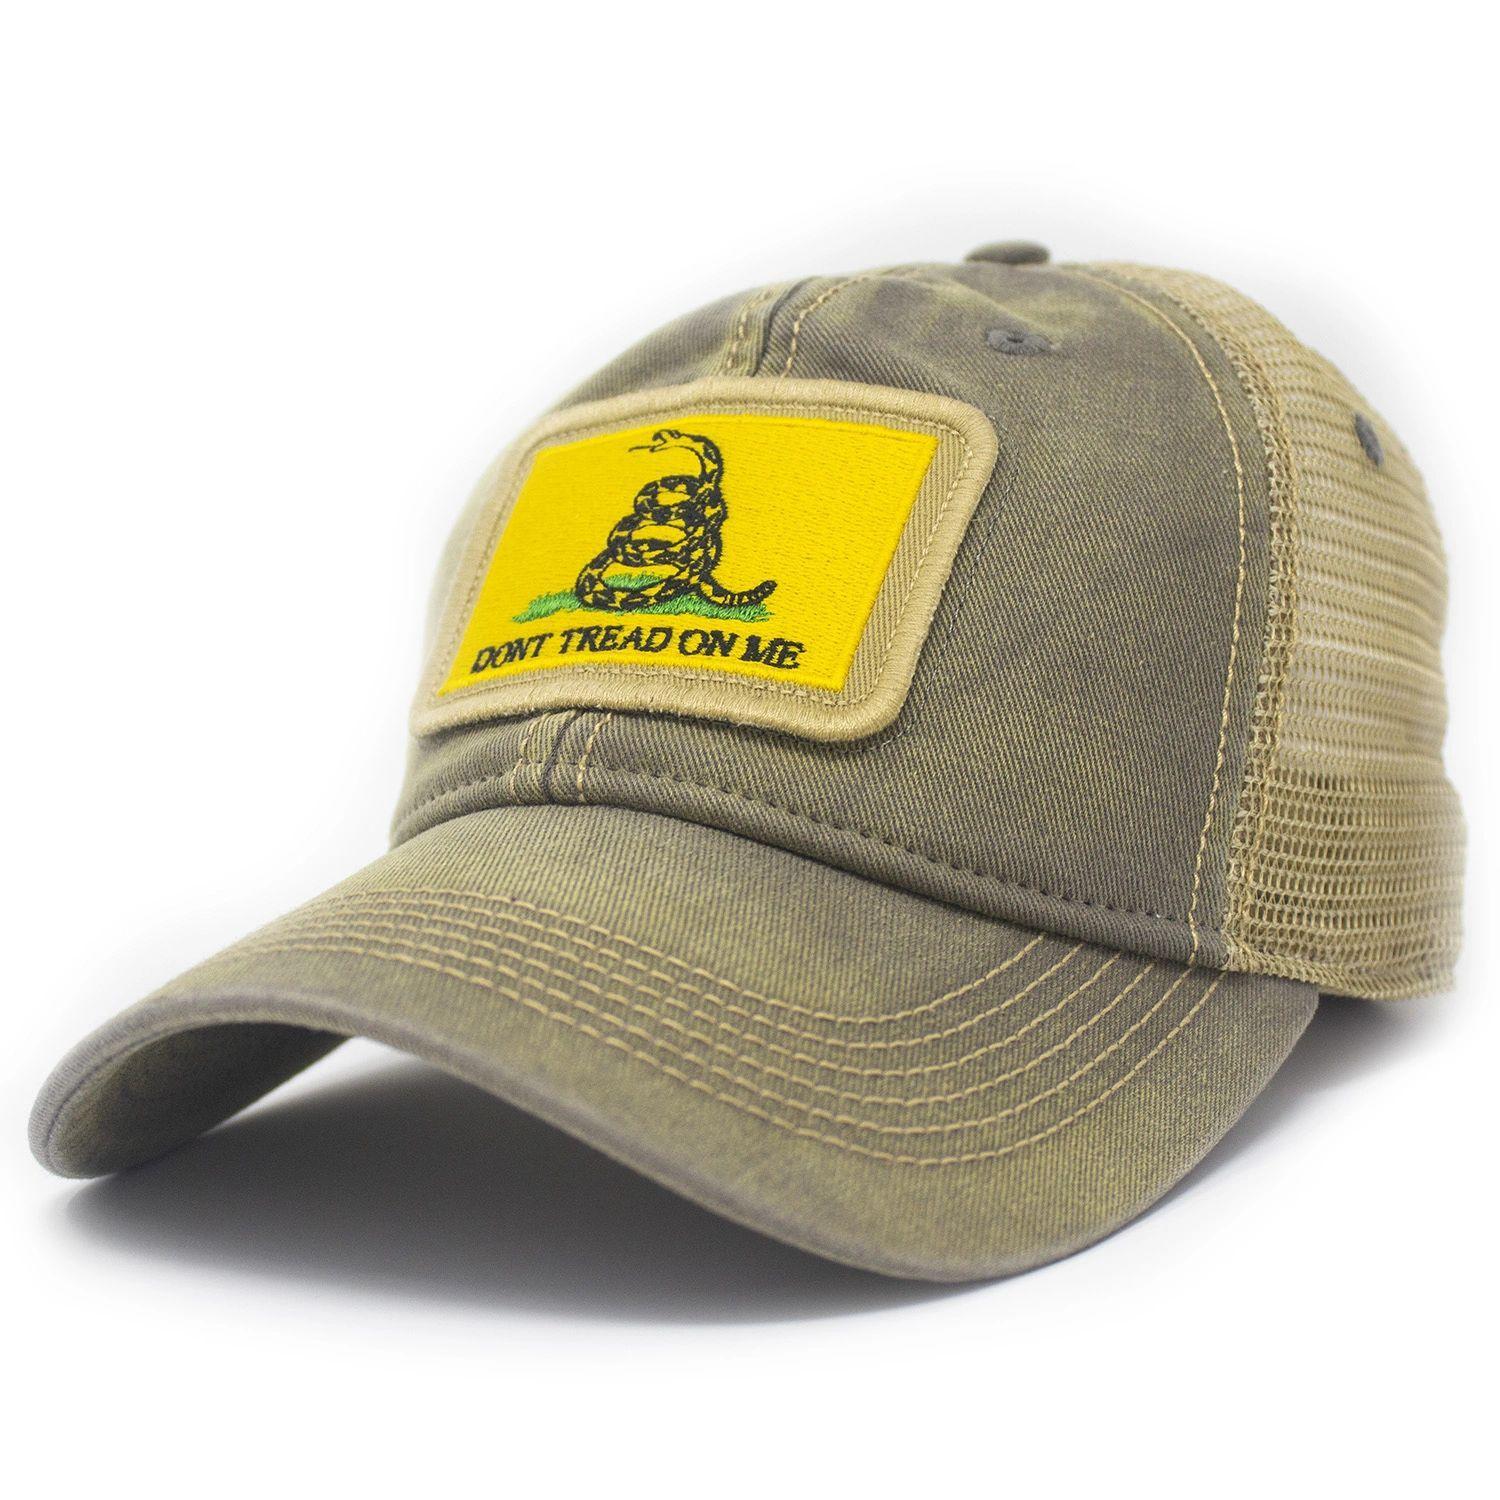 Grey trucker hat with khaki mesh back panels and tan stitching laying. Ballcap is embroidered with a patch of the Gadsden flag, the patch has a yellow background with a snake coiled in grass and the words Don't Tread On Me